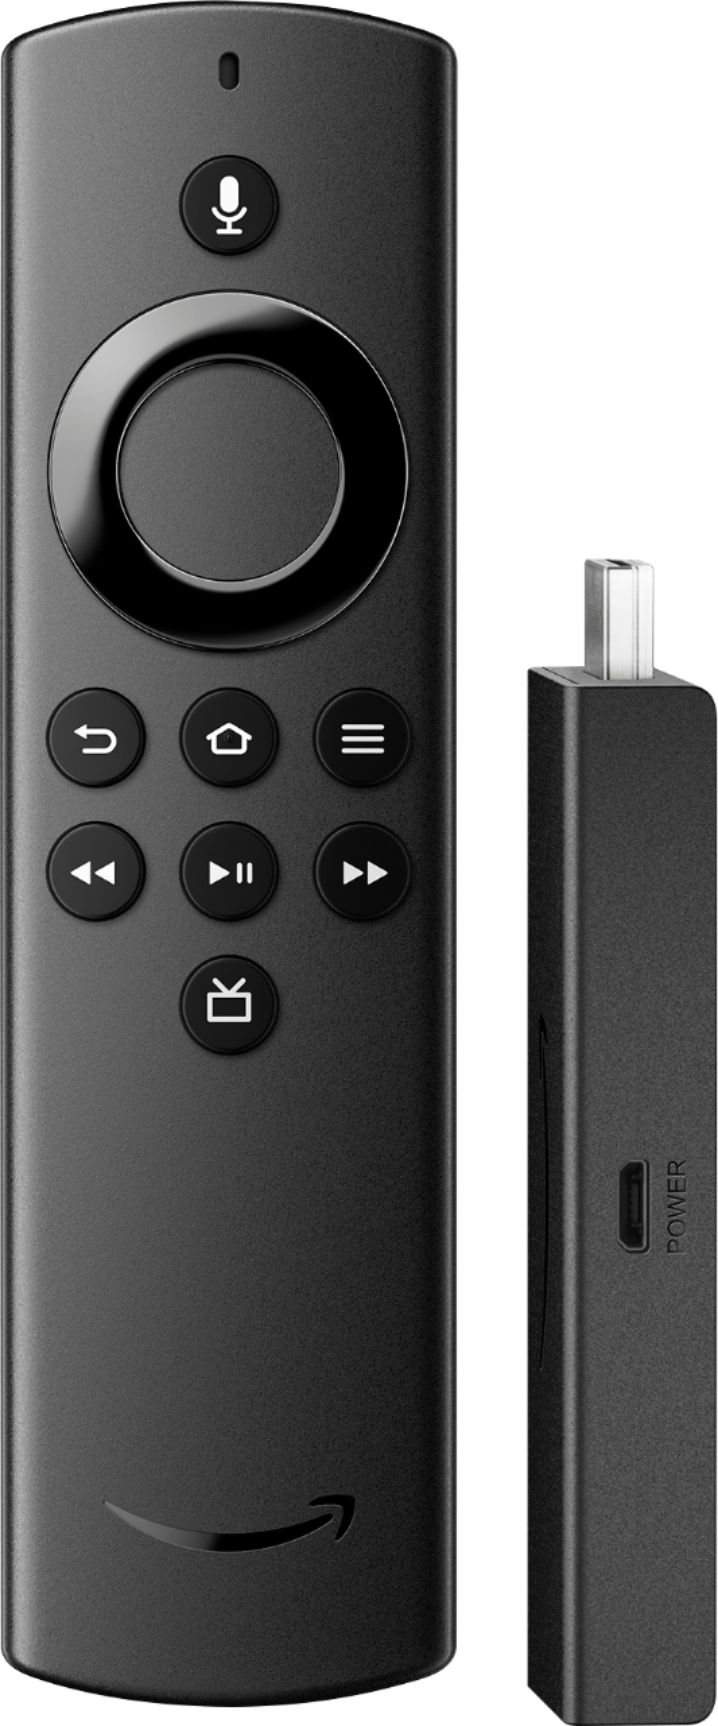 Fire TV with 4K Ultra HD and Alexa Voice  - Best Buy